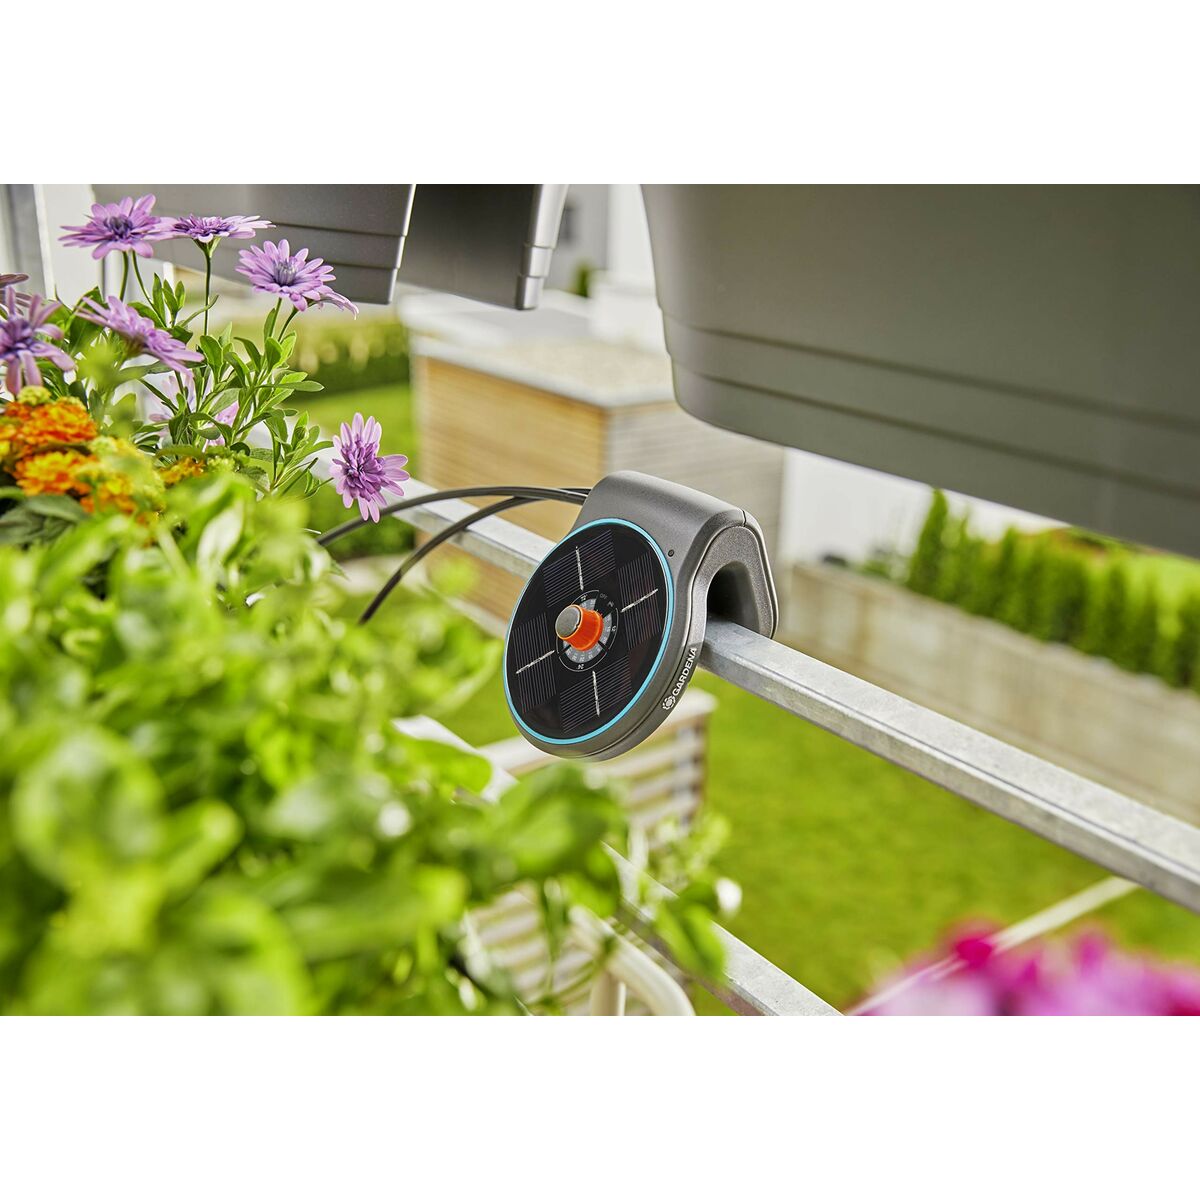 Automatic Drip Watering System for Plant Pots Gardena Aquabloom